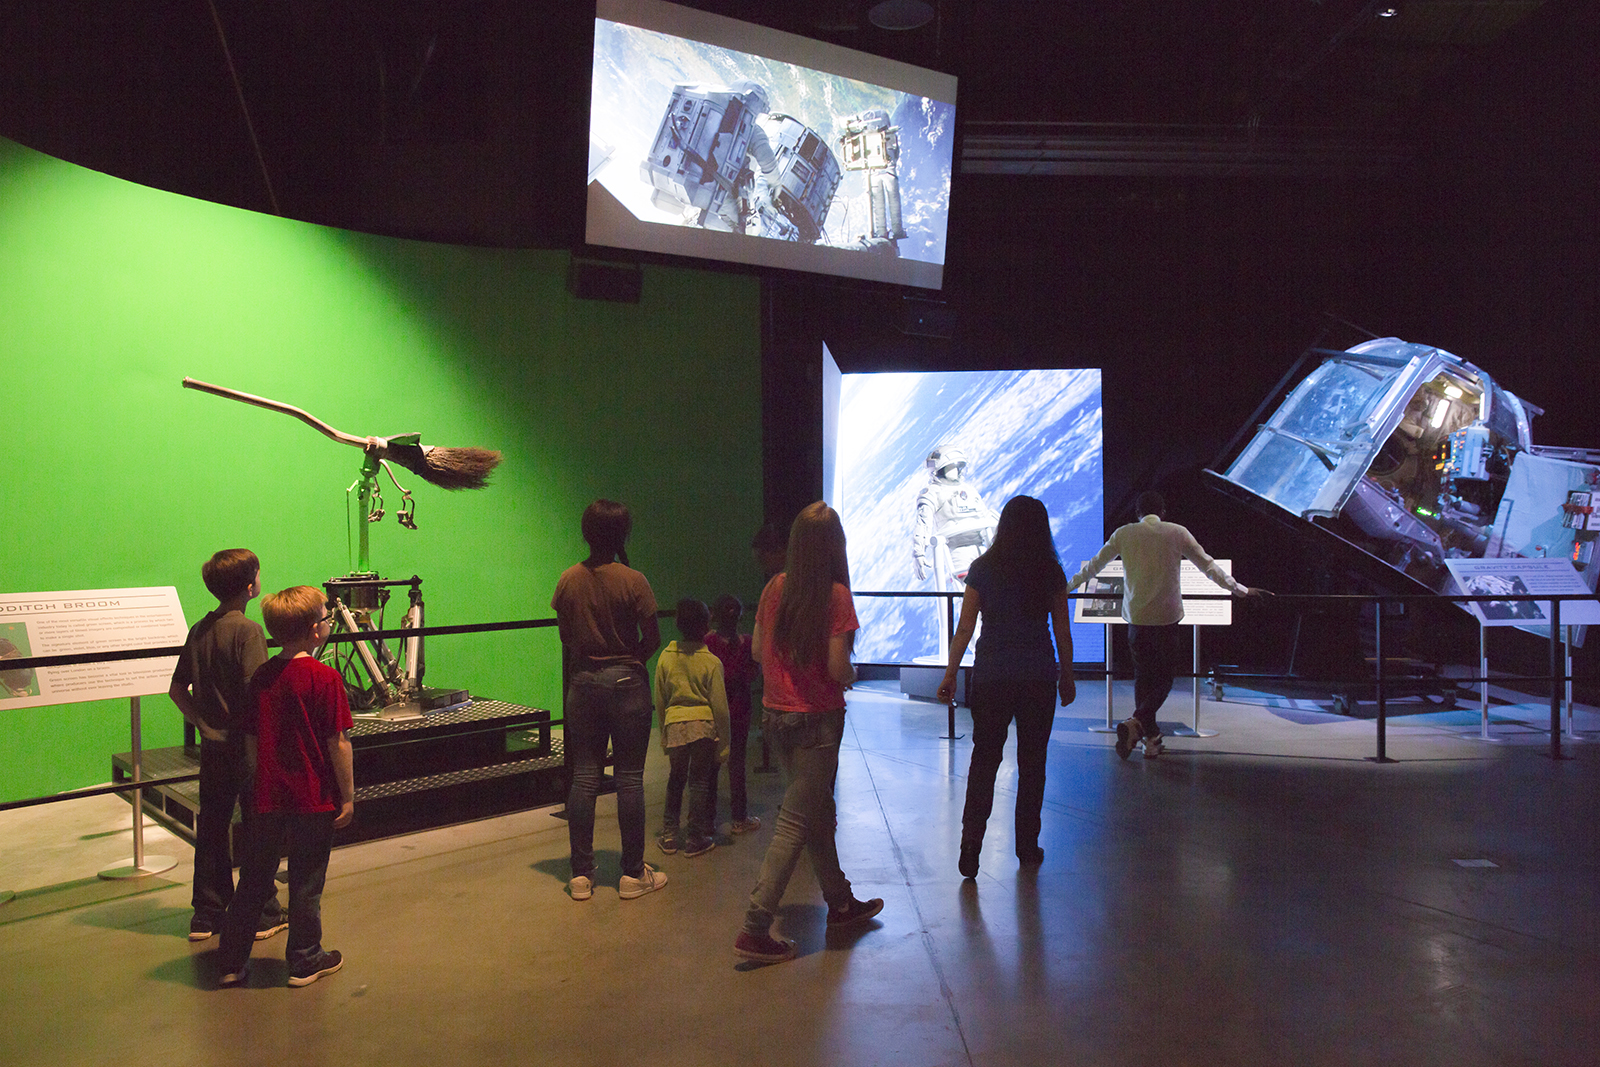 Green screen technology, utilized in Gravity and the Harry Potter series, is highlighted in the post-production section of the Stage 48 soundstage.